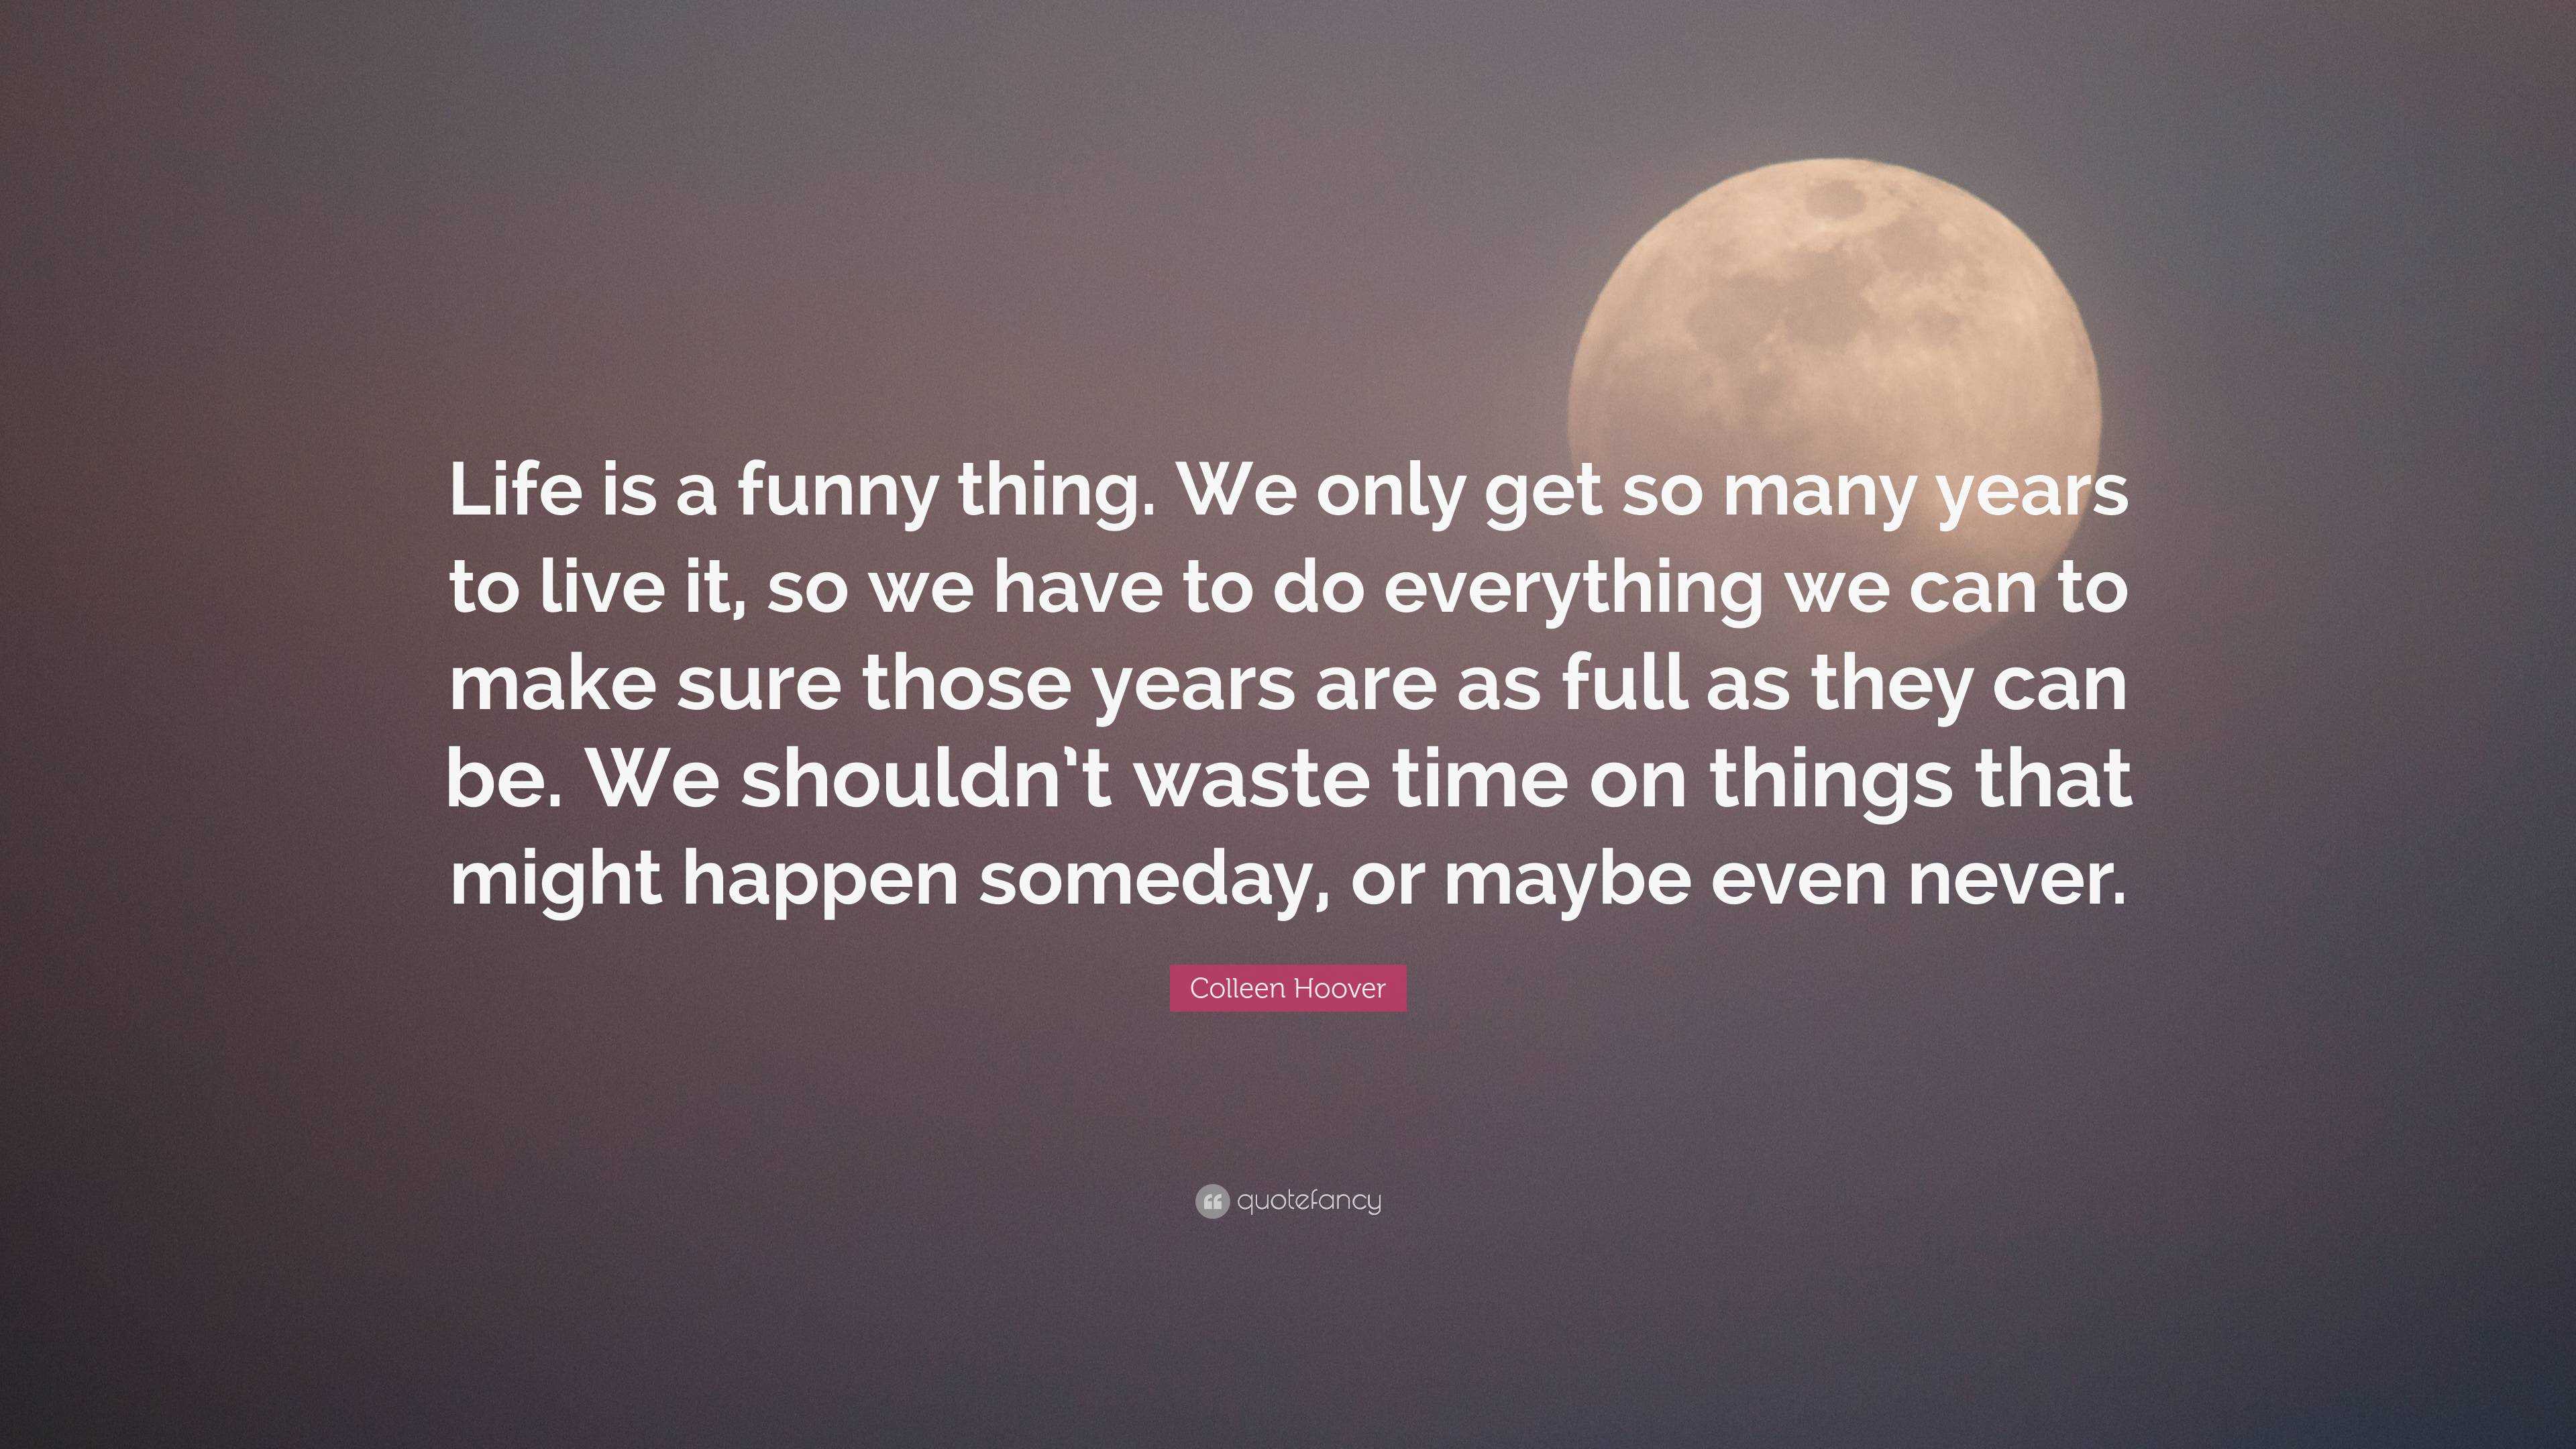 Colleen Hoover Quote: “Life is a funny thing. We only get so many years to  live it, so we have to do everything we can to make sure those years...”